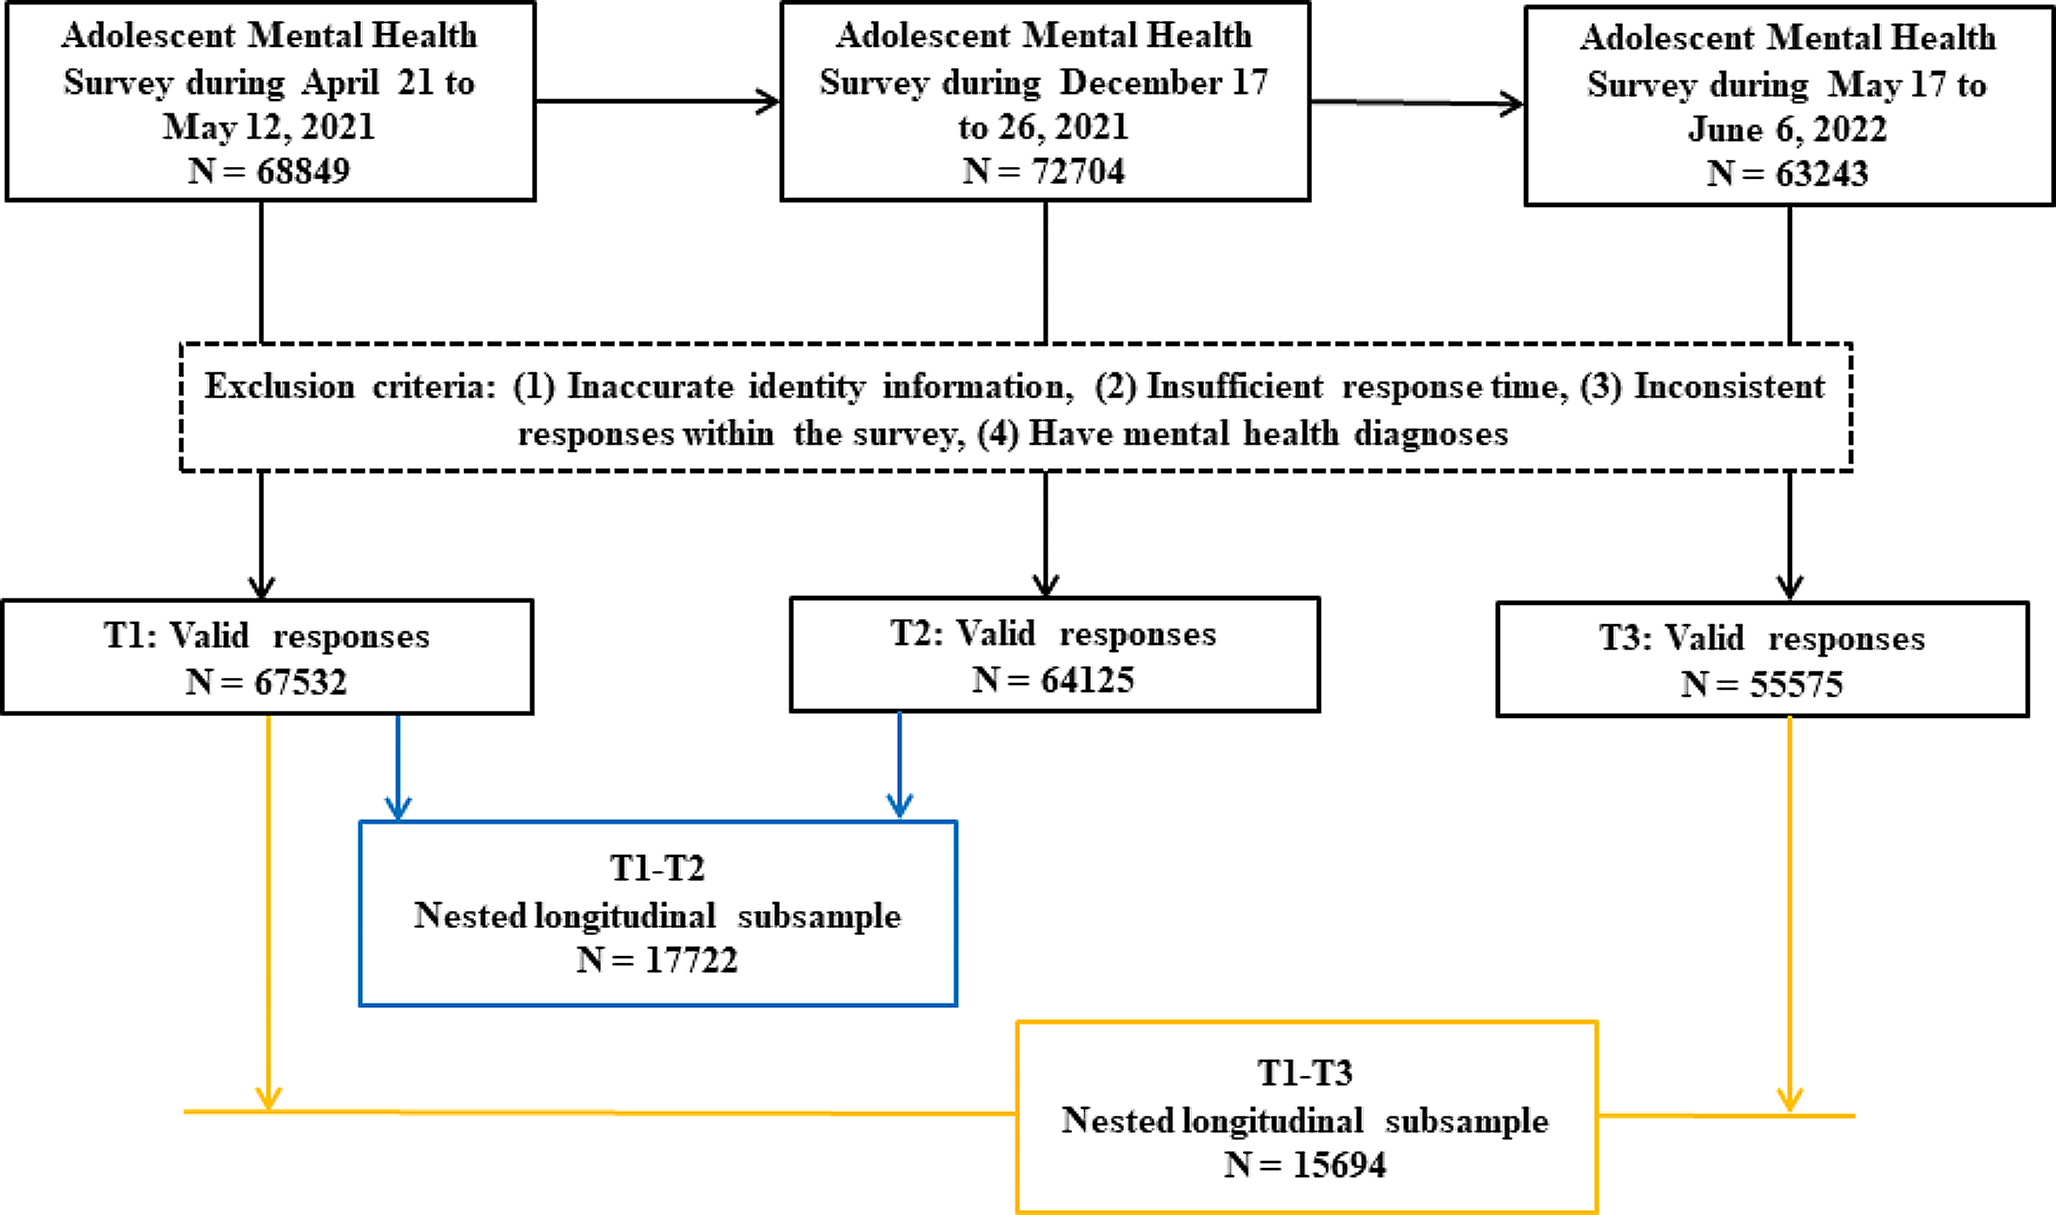 Bidirectional associations between short sleep duration, insomnia symptoms, and psychotic-like experiences in adolescents